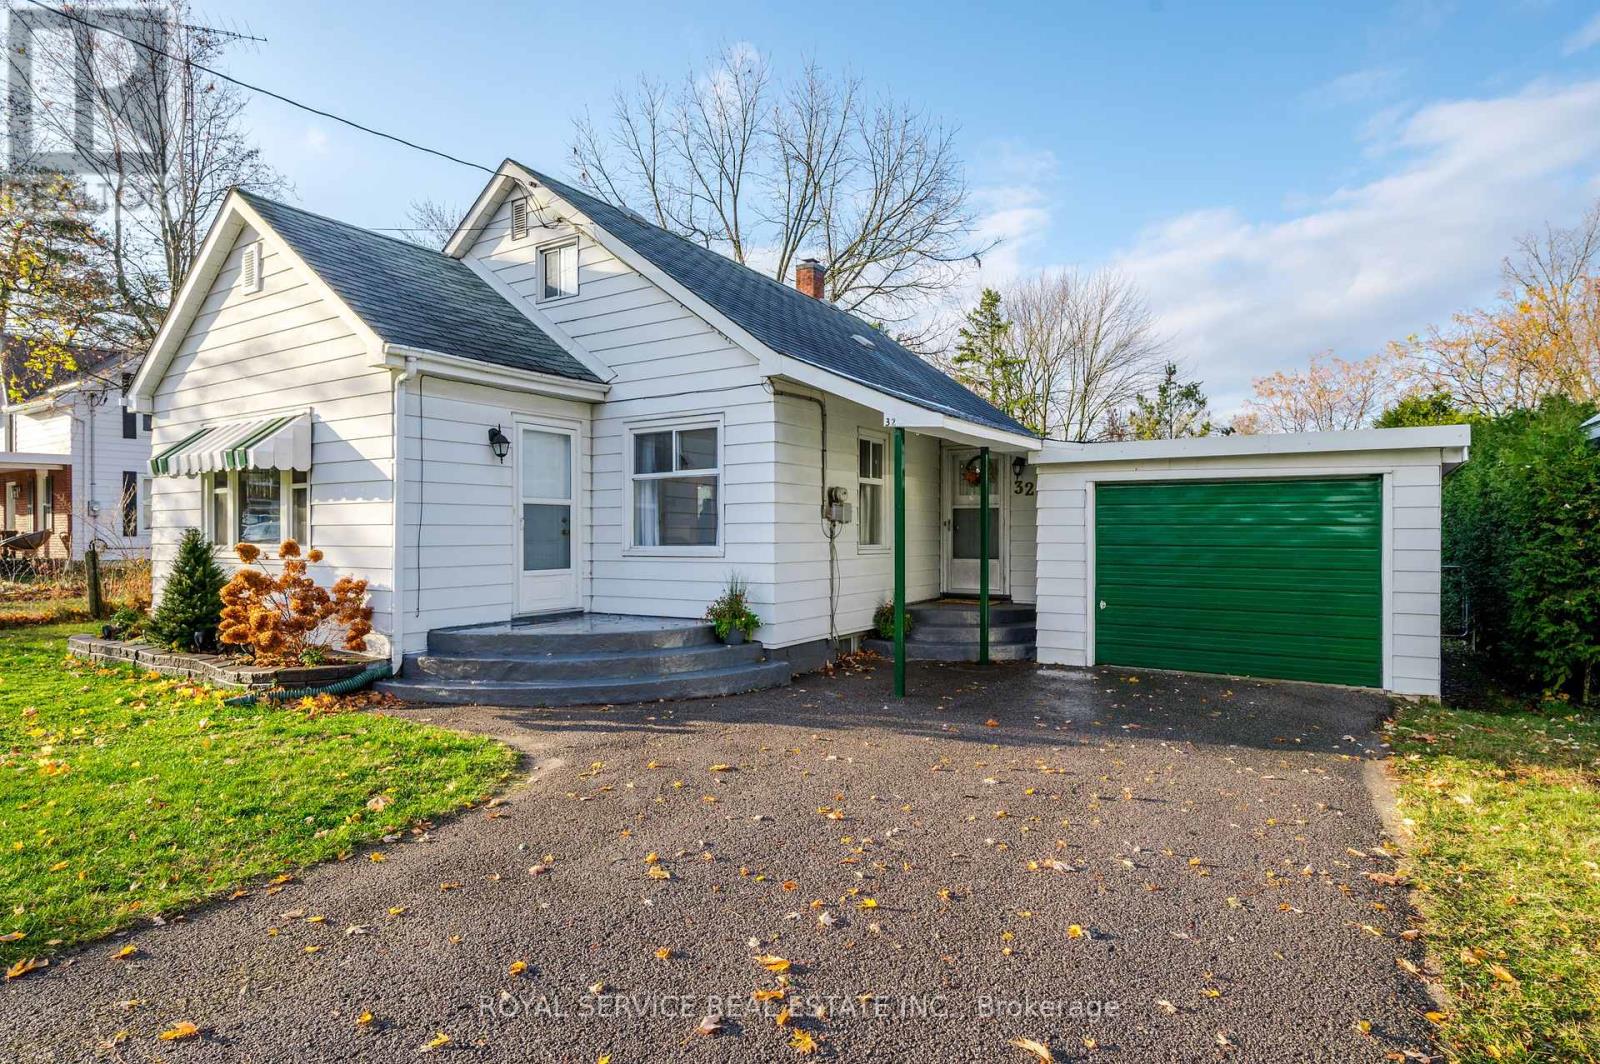 32 SMITH ST located in Smith-Ennismore-Lakefield, Ontario